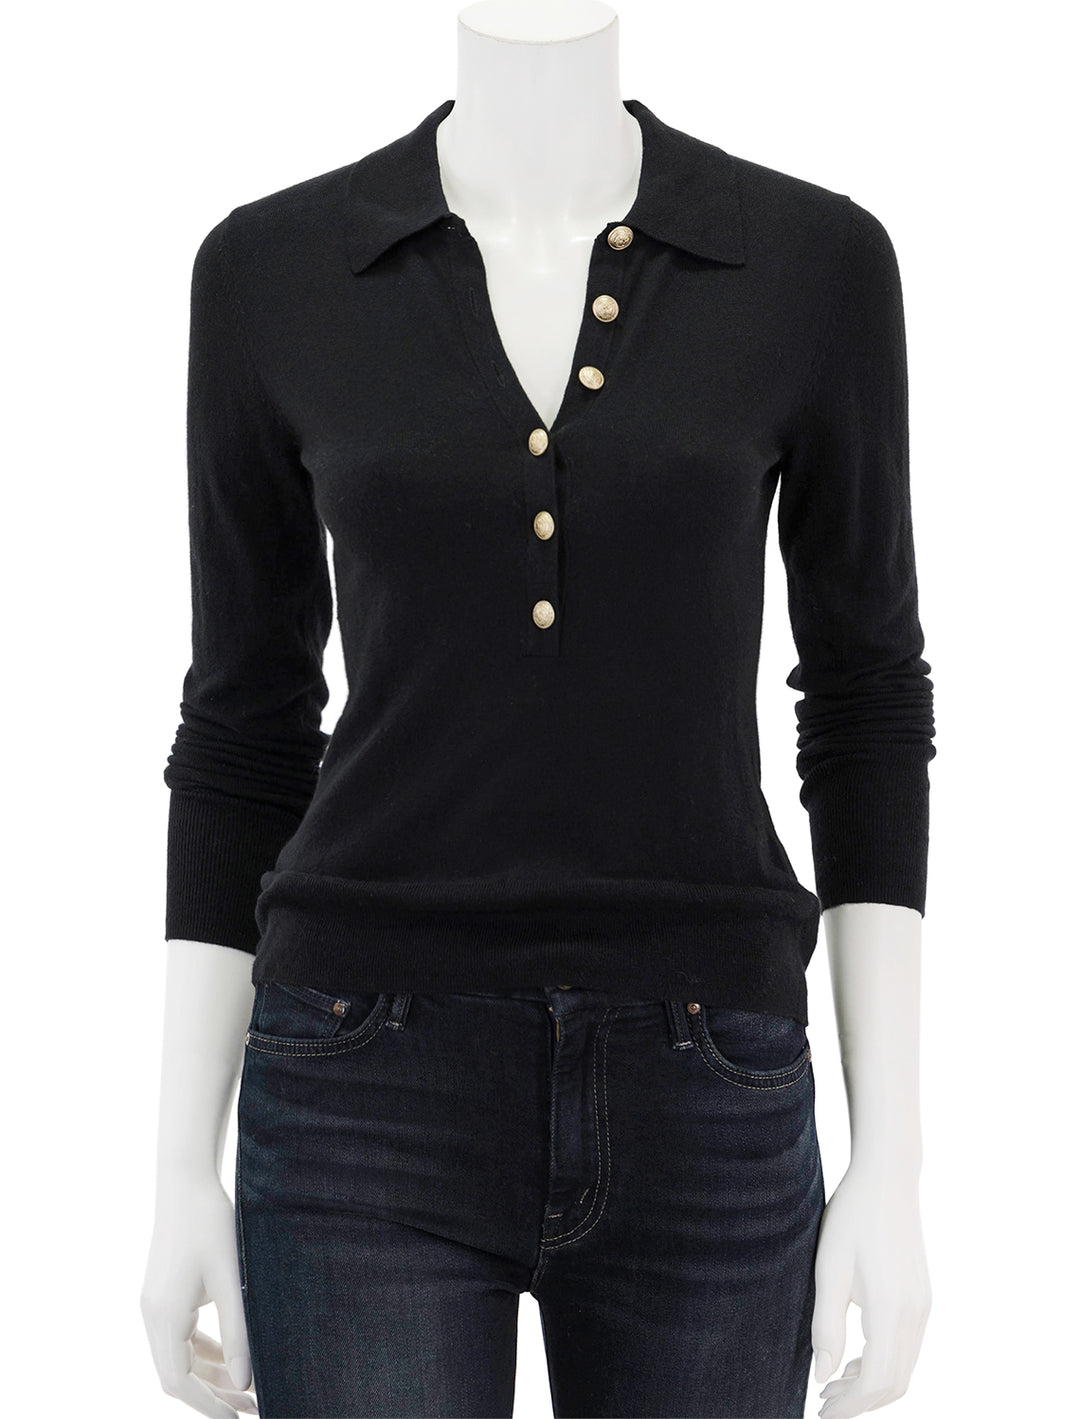 Front view of L'agence's sterling collared sweater in black.